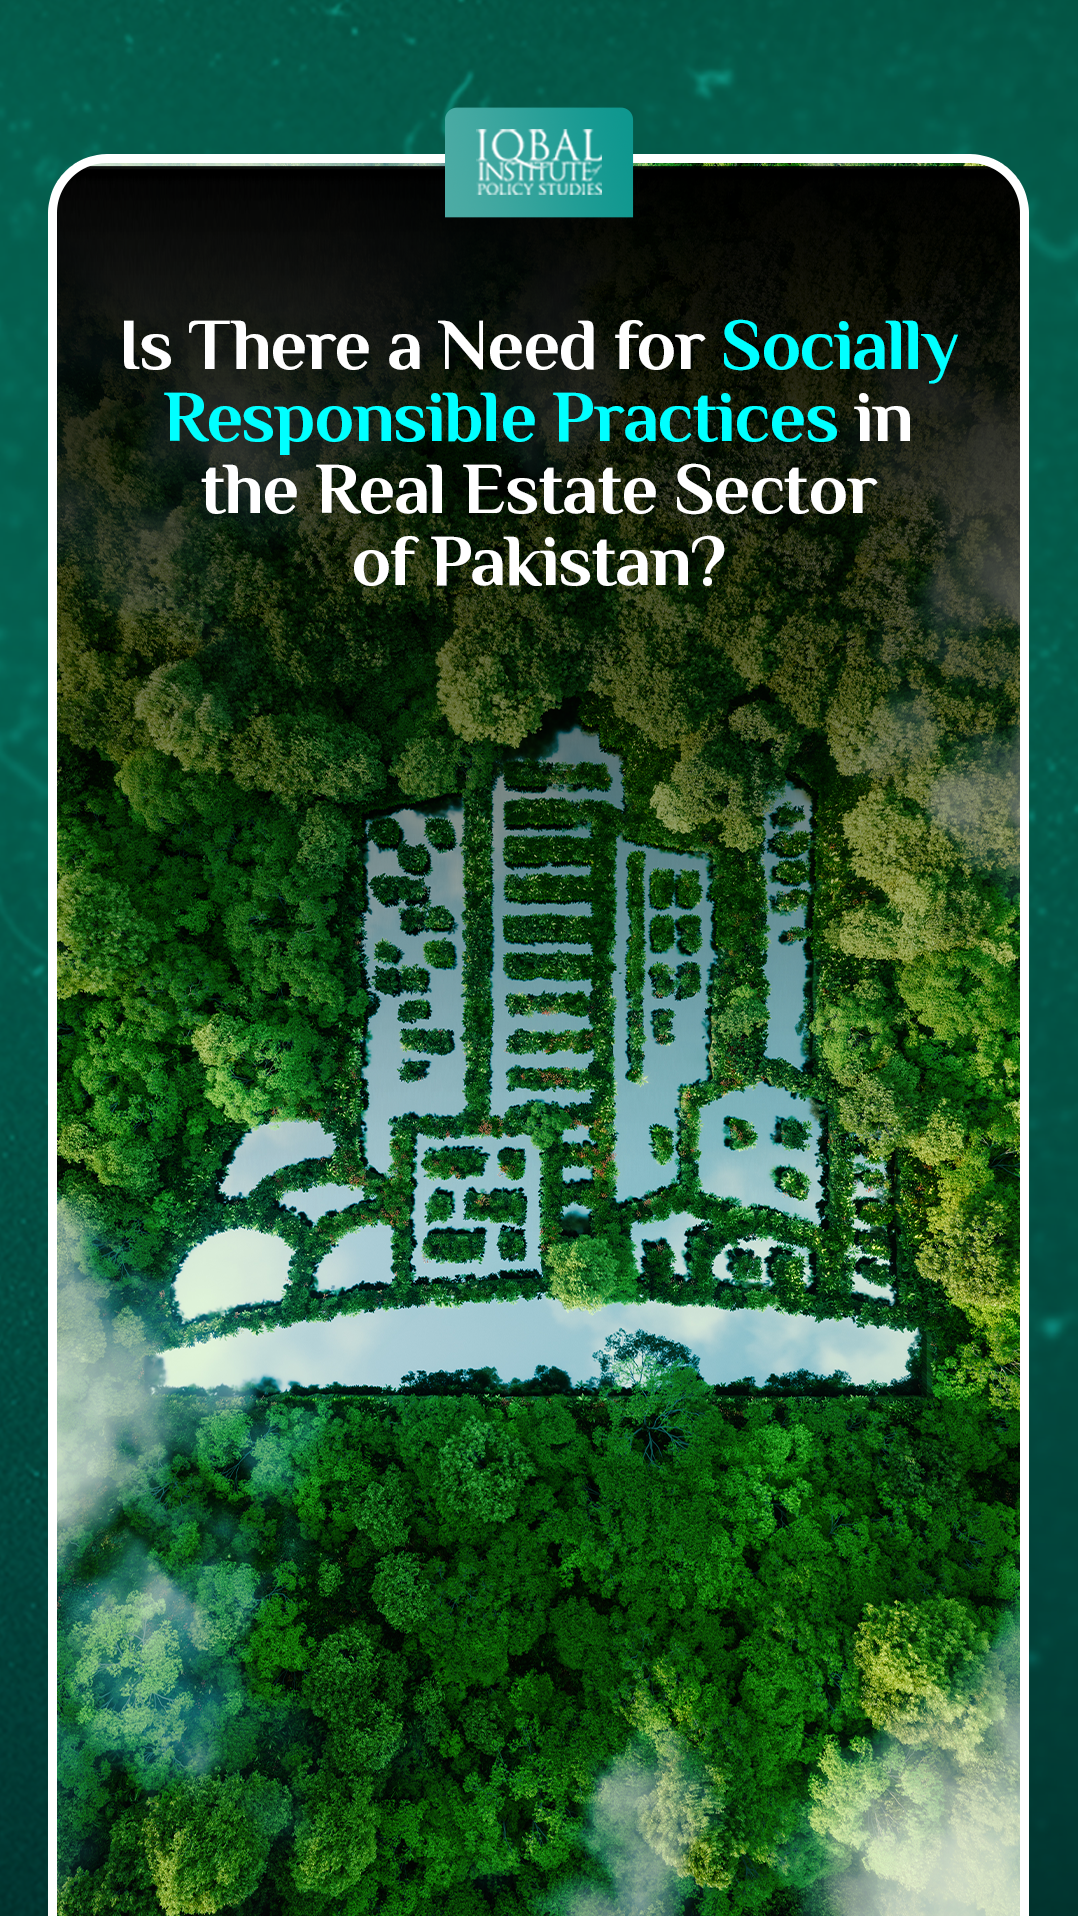 Is there a Need for Socially Responsible Practices in the Real Estate of Pakistan?